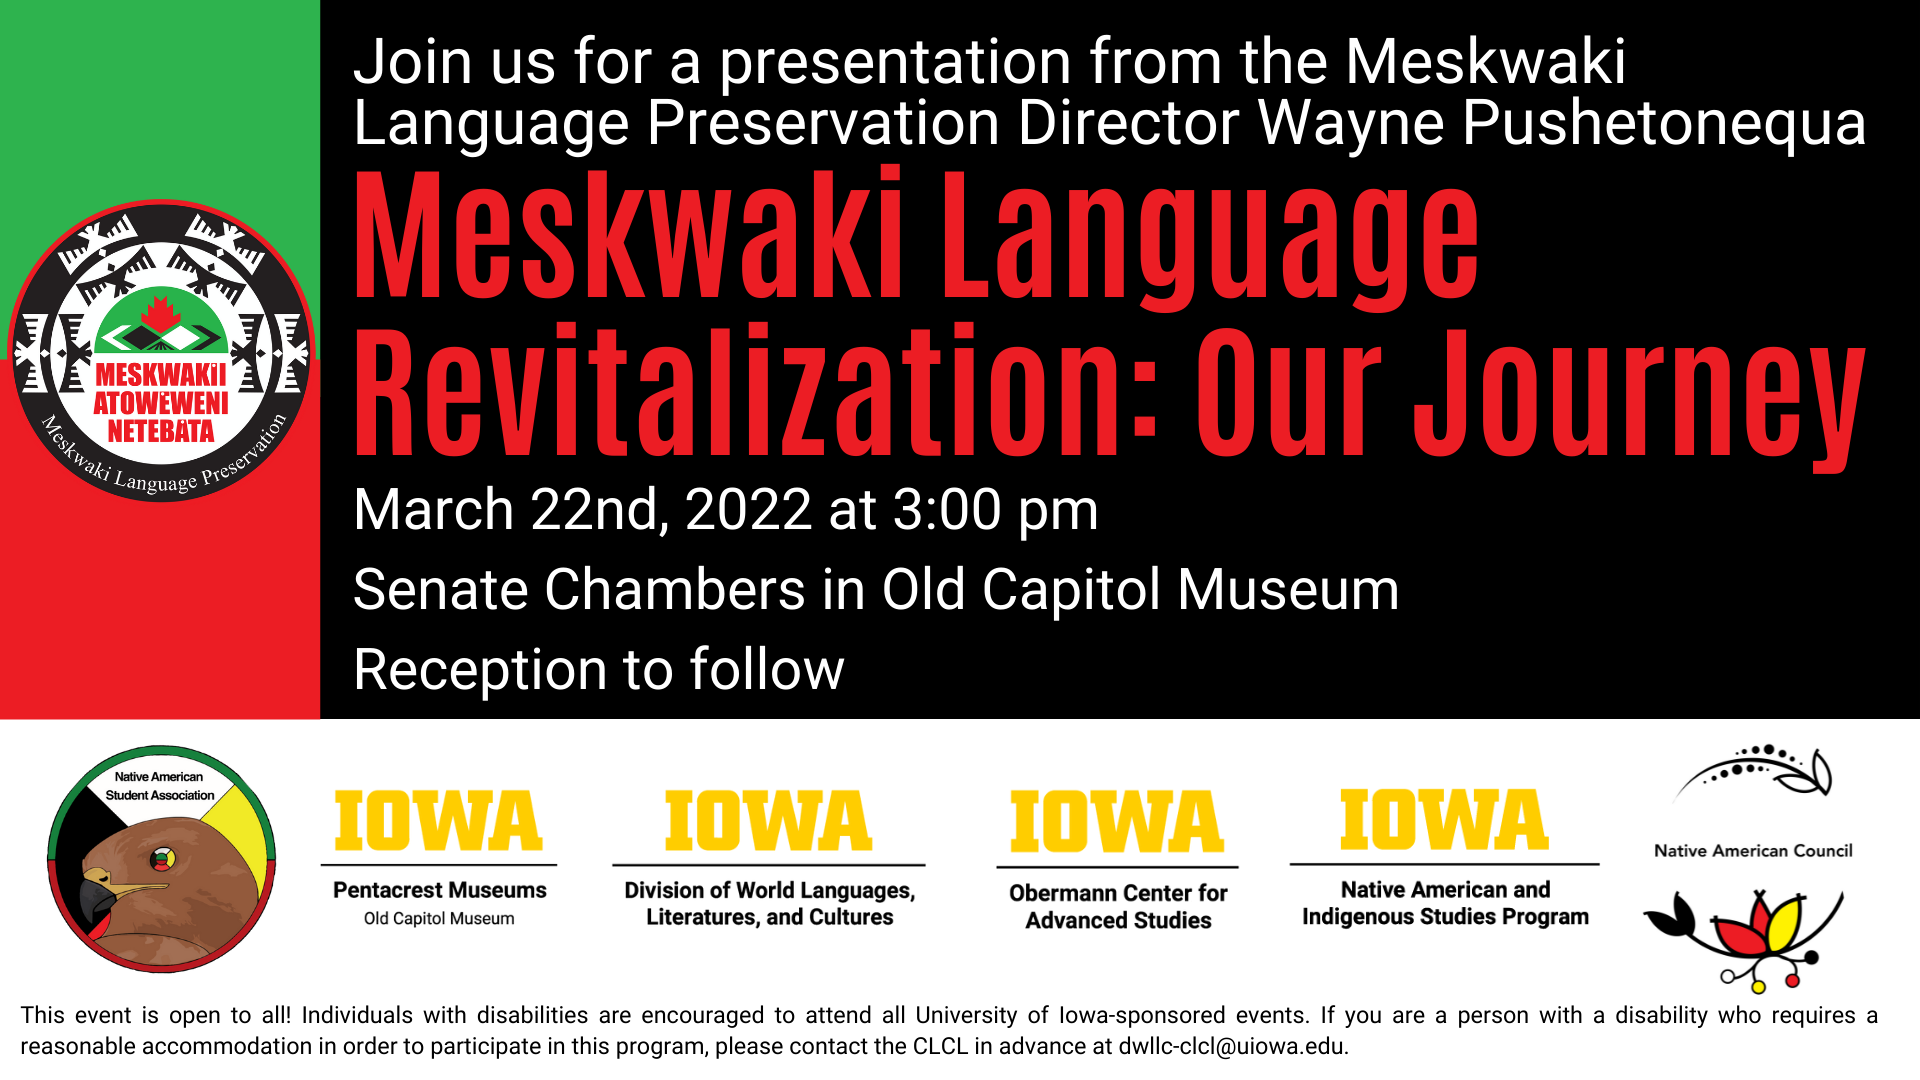 Join us for a presentation from the Meskwaki language preservation Director Wayne Pushetonequa. Meskwaki language revitalization our journey. March 22, 2022 at 3 PM in the senate chambers in the old capital Museum with a reception to follow.